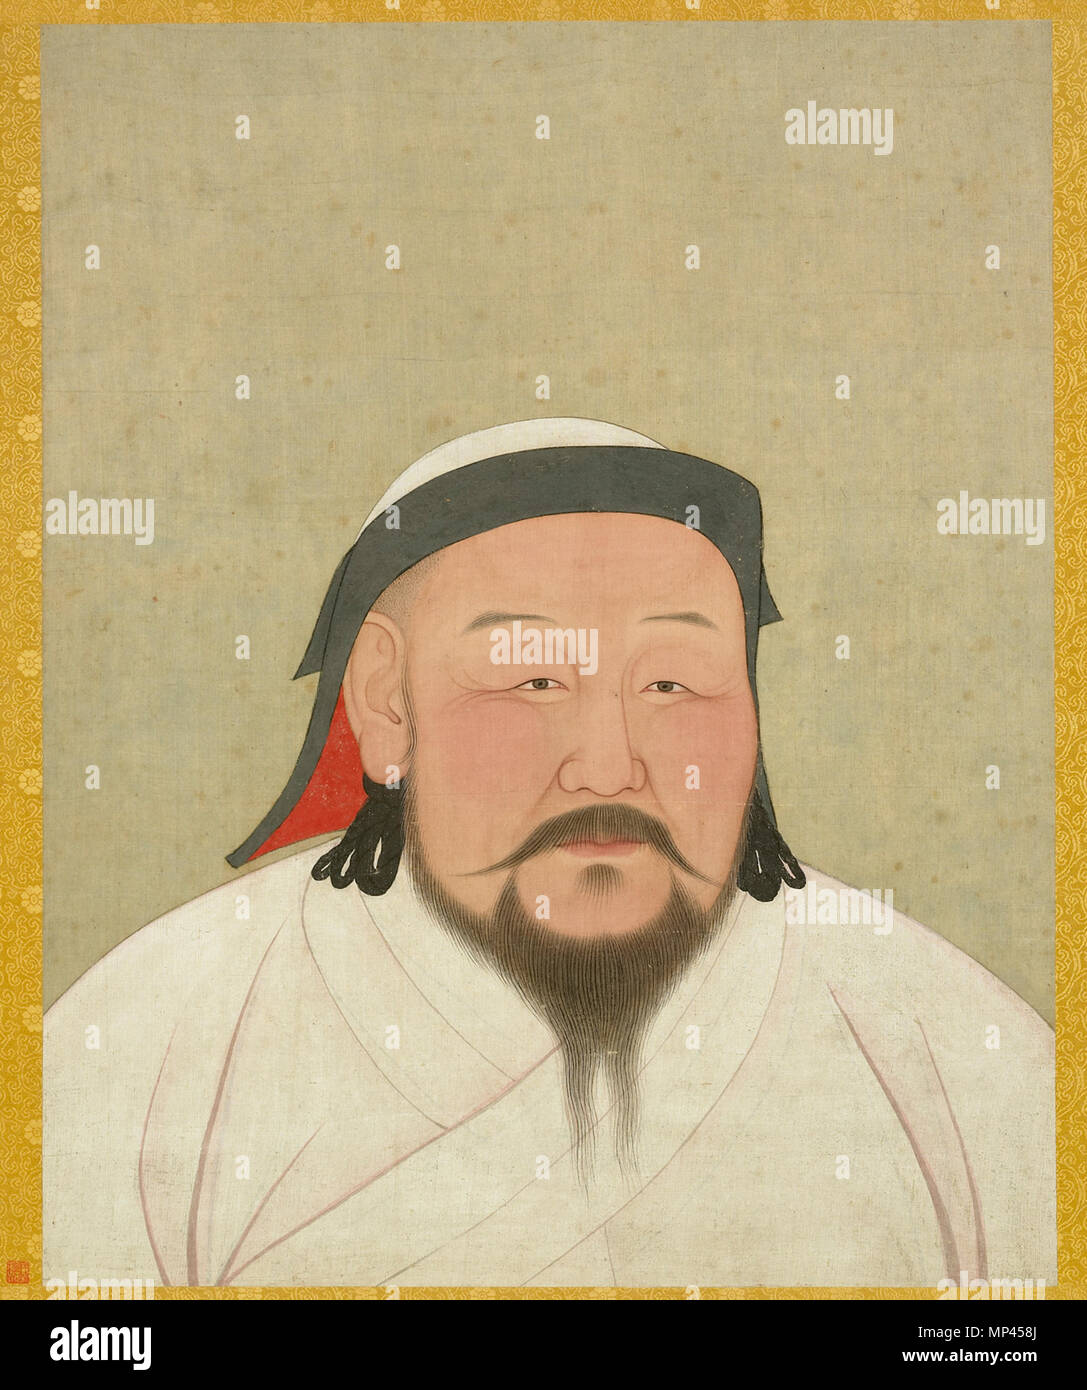 https://c8.alamy.com/comp/MP458J/kublai-khan-as-the-first-yuan-emperor-shizu-yuan-dynasty-12711368-album-leaf-ink-and-color-on-silk-national-palace-museum-taipei-000324-00003-photograph-national-palace-museum-taipei-aam-emperors-treasures-kublai-khan-ex2016324-1279-yuanemperoralbumkhubilaiportrait-MP458J.jpg